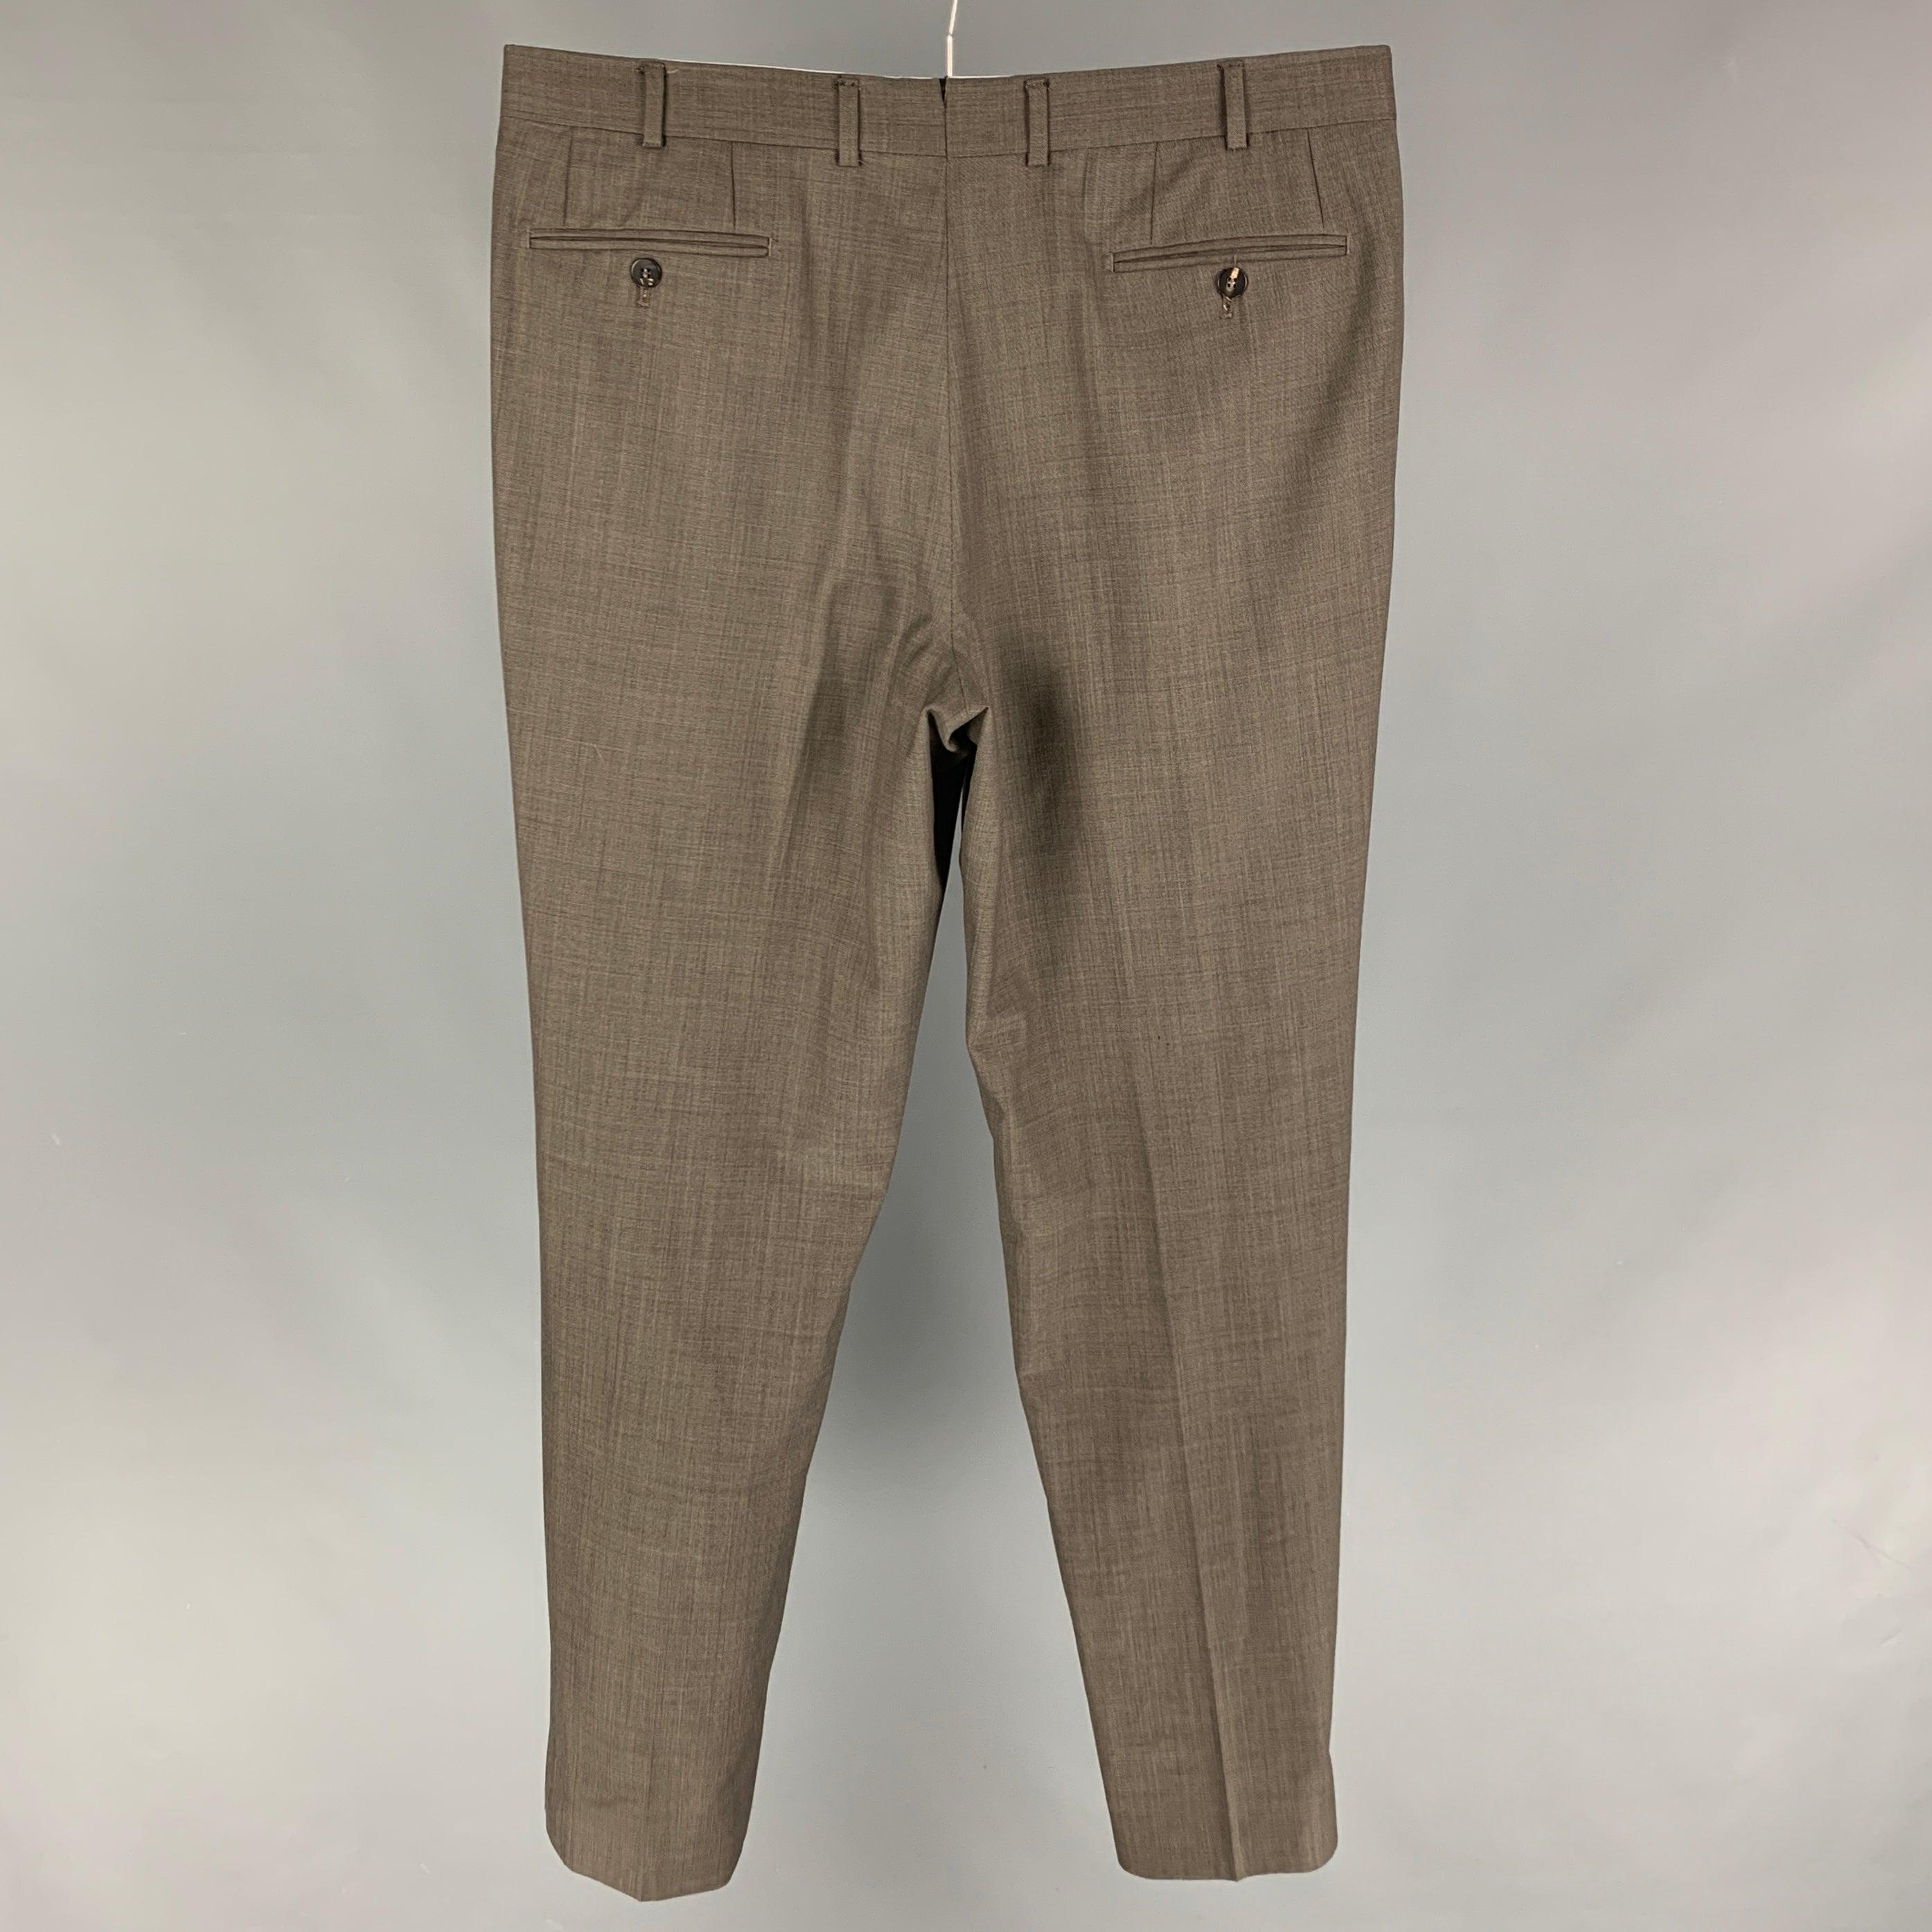 ISAIA dress pants comes in a taupe wool featuring a flat front and a zip fly closure. Made in Romania.
 Very Good
 Pre-Owned Condition. 
 

 Marked:  54 
 

 Measurements: 
  Waist: 36 inches Rise: 11 inches Inseam: 33 inches 
  
  
  
 Sui Generis